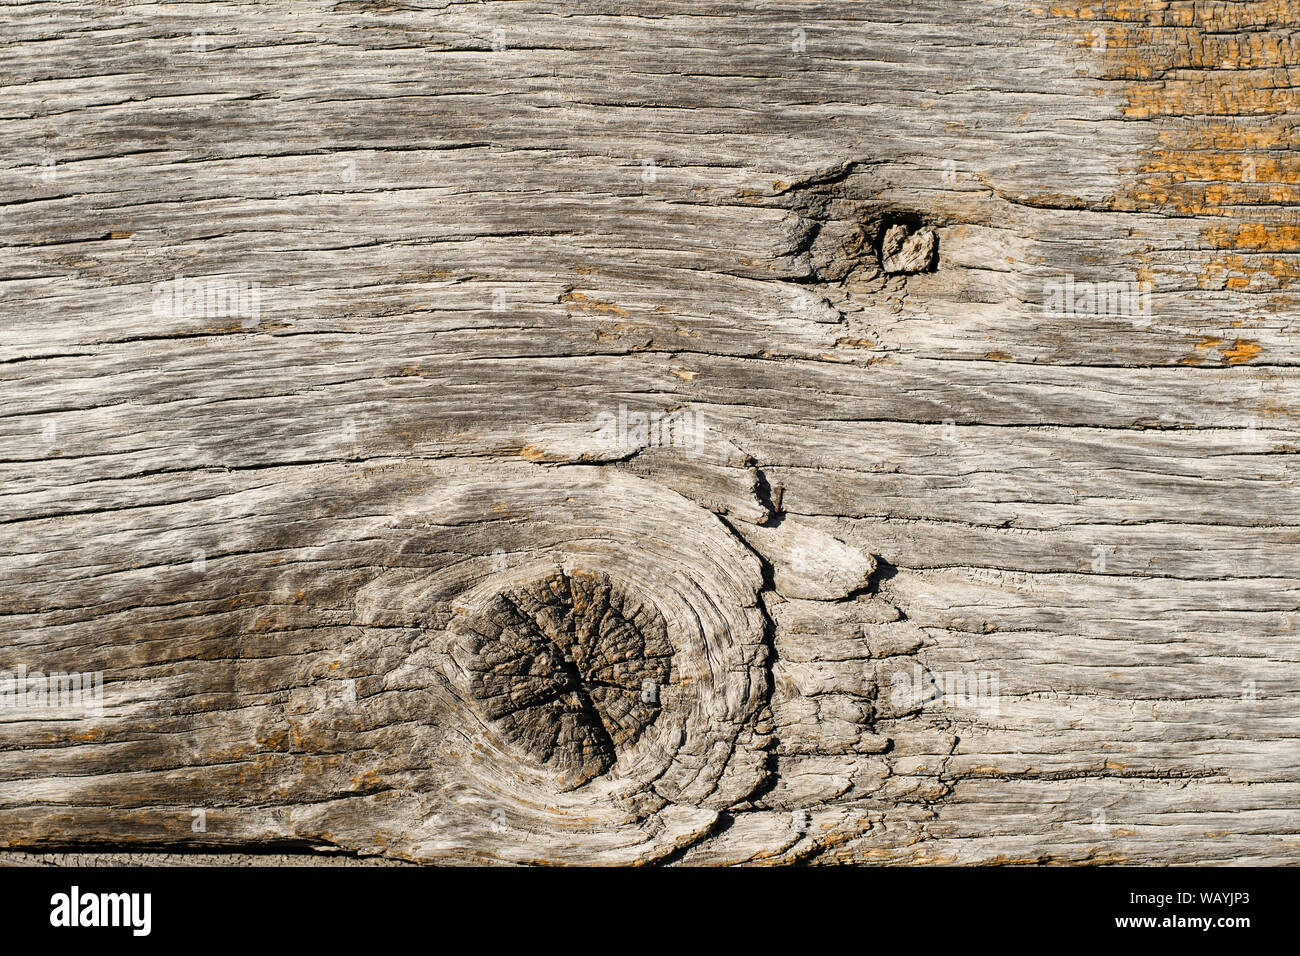 Texture of raw rustic wood. Can be used as background. Stock Photo